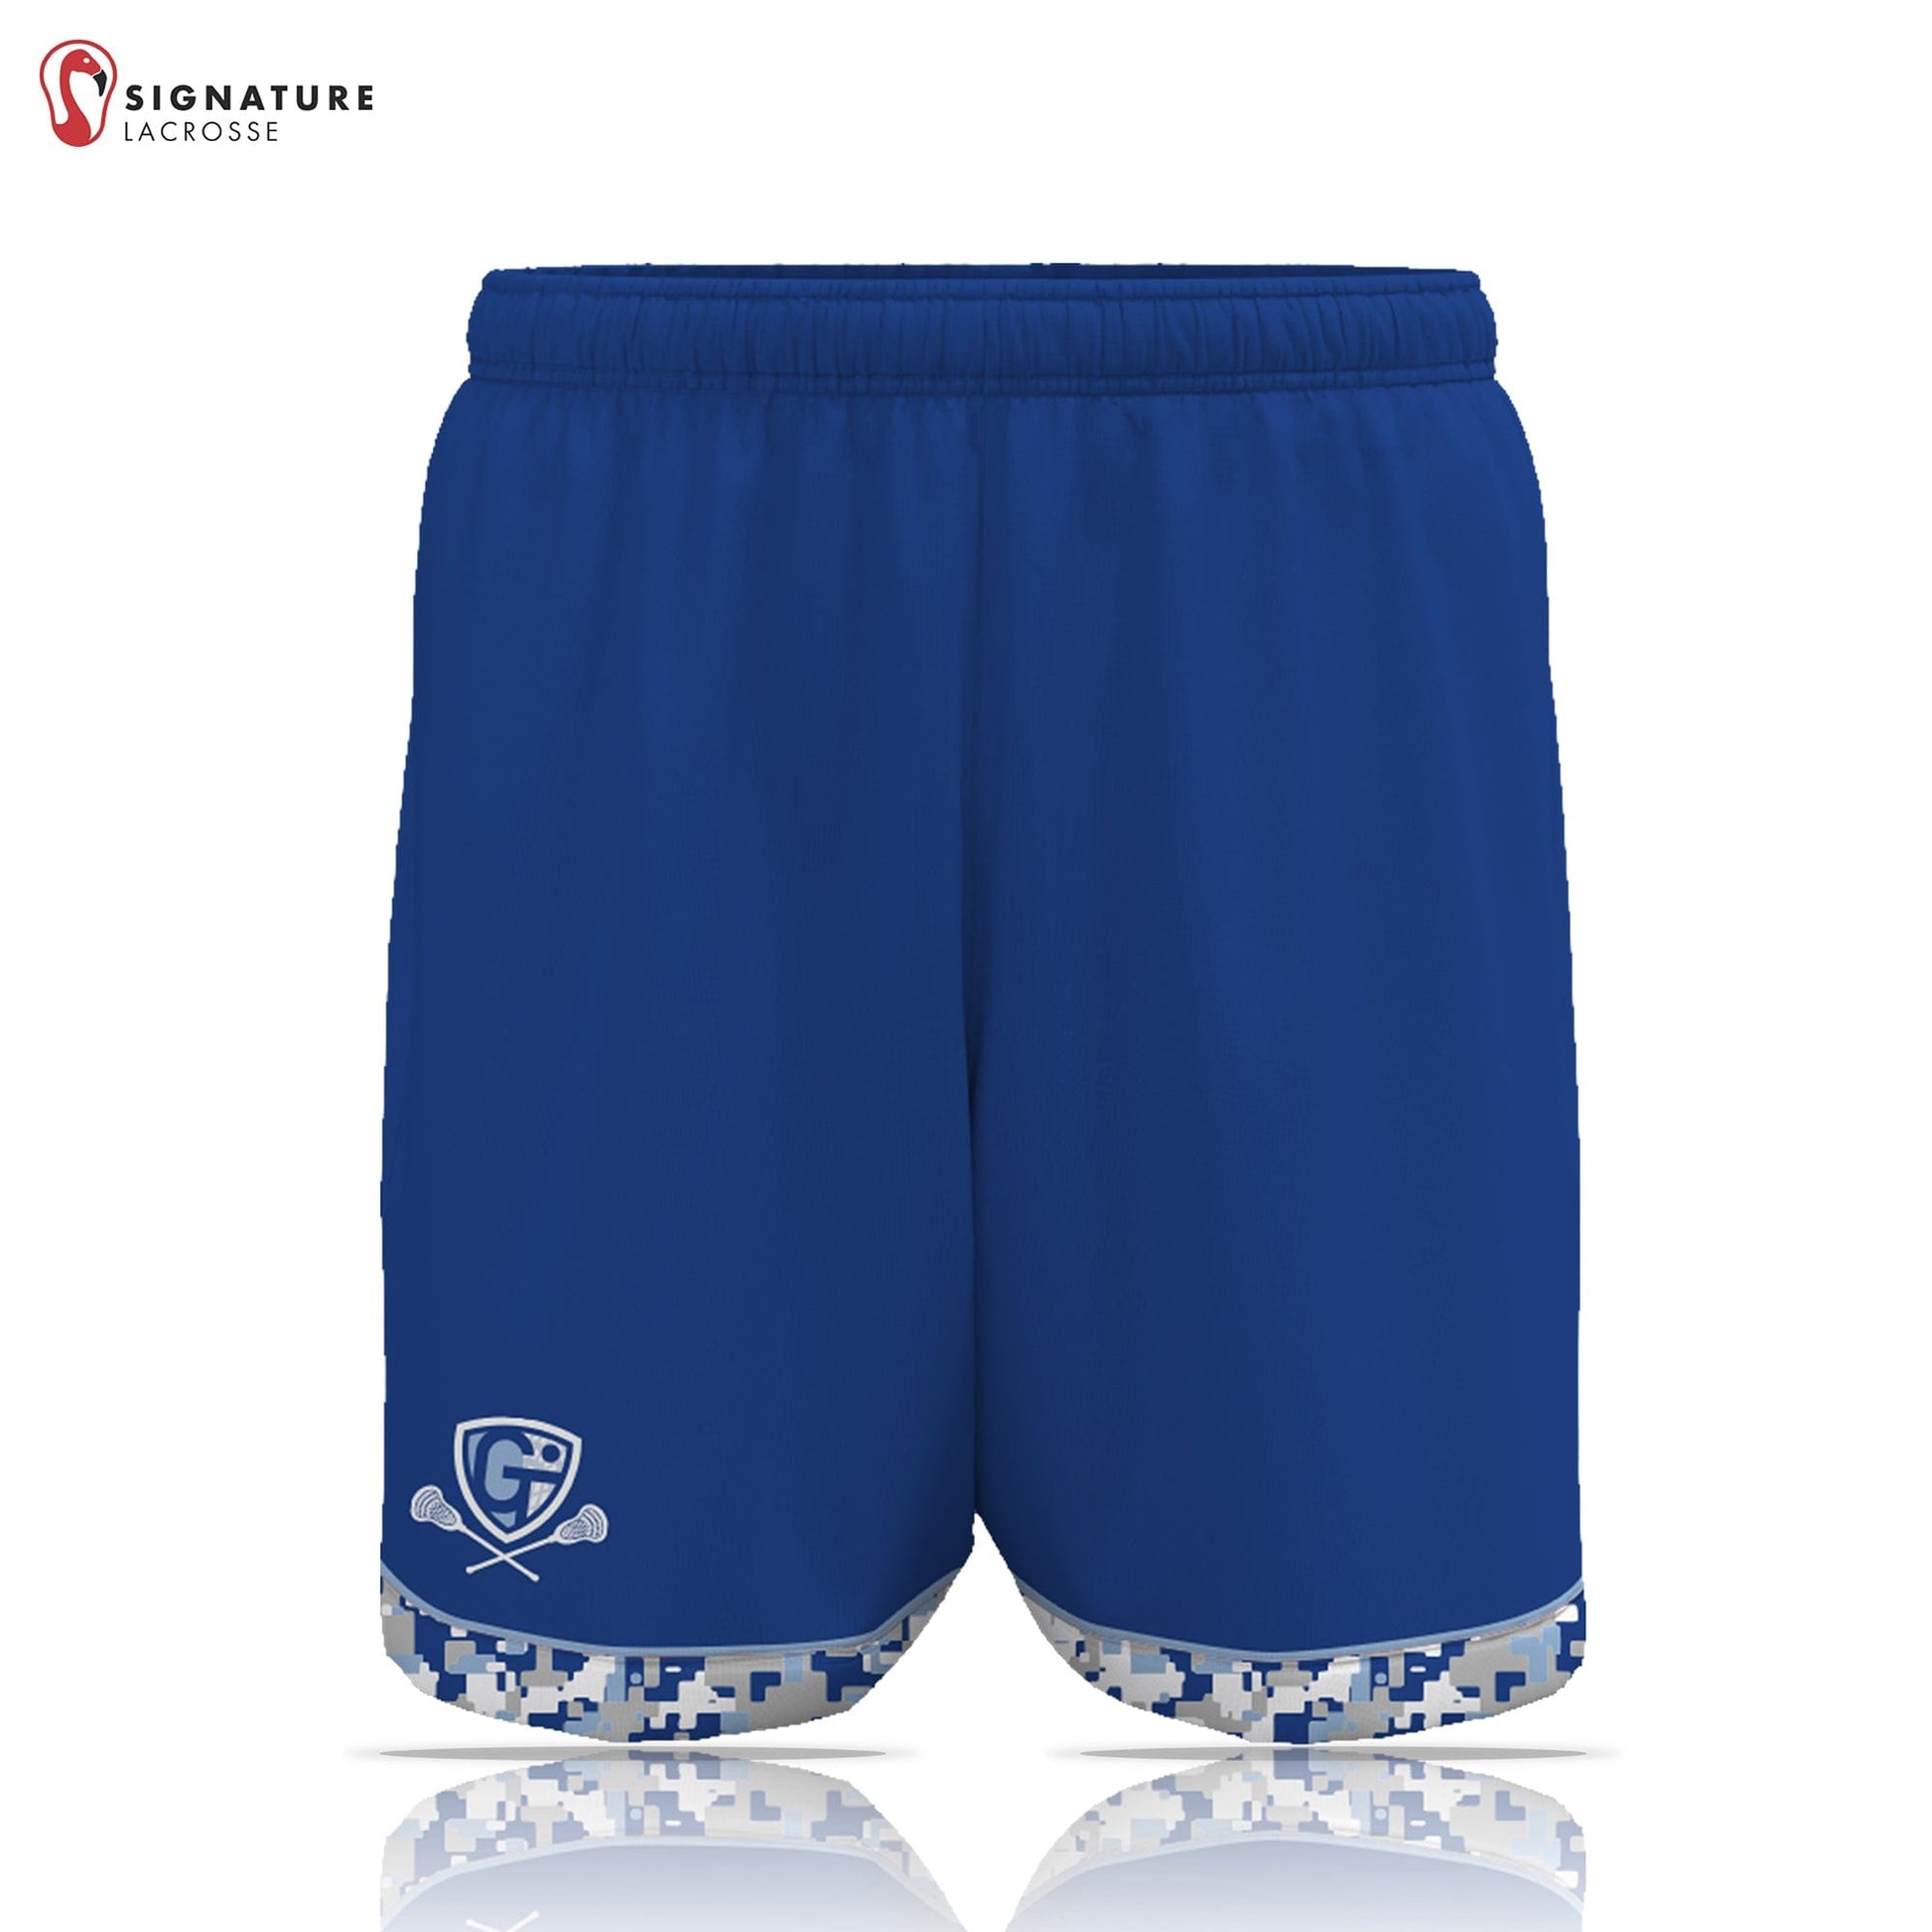 Georgetown-Triton Youth Lacrosse Men's Player Game Shorts: 5-6 Signature Lacrosse